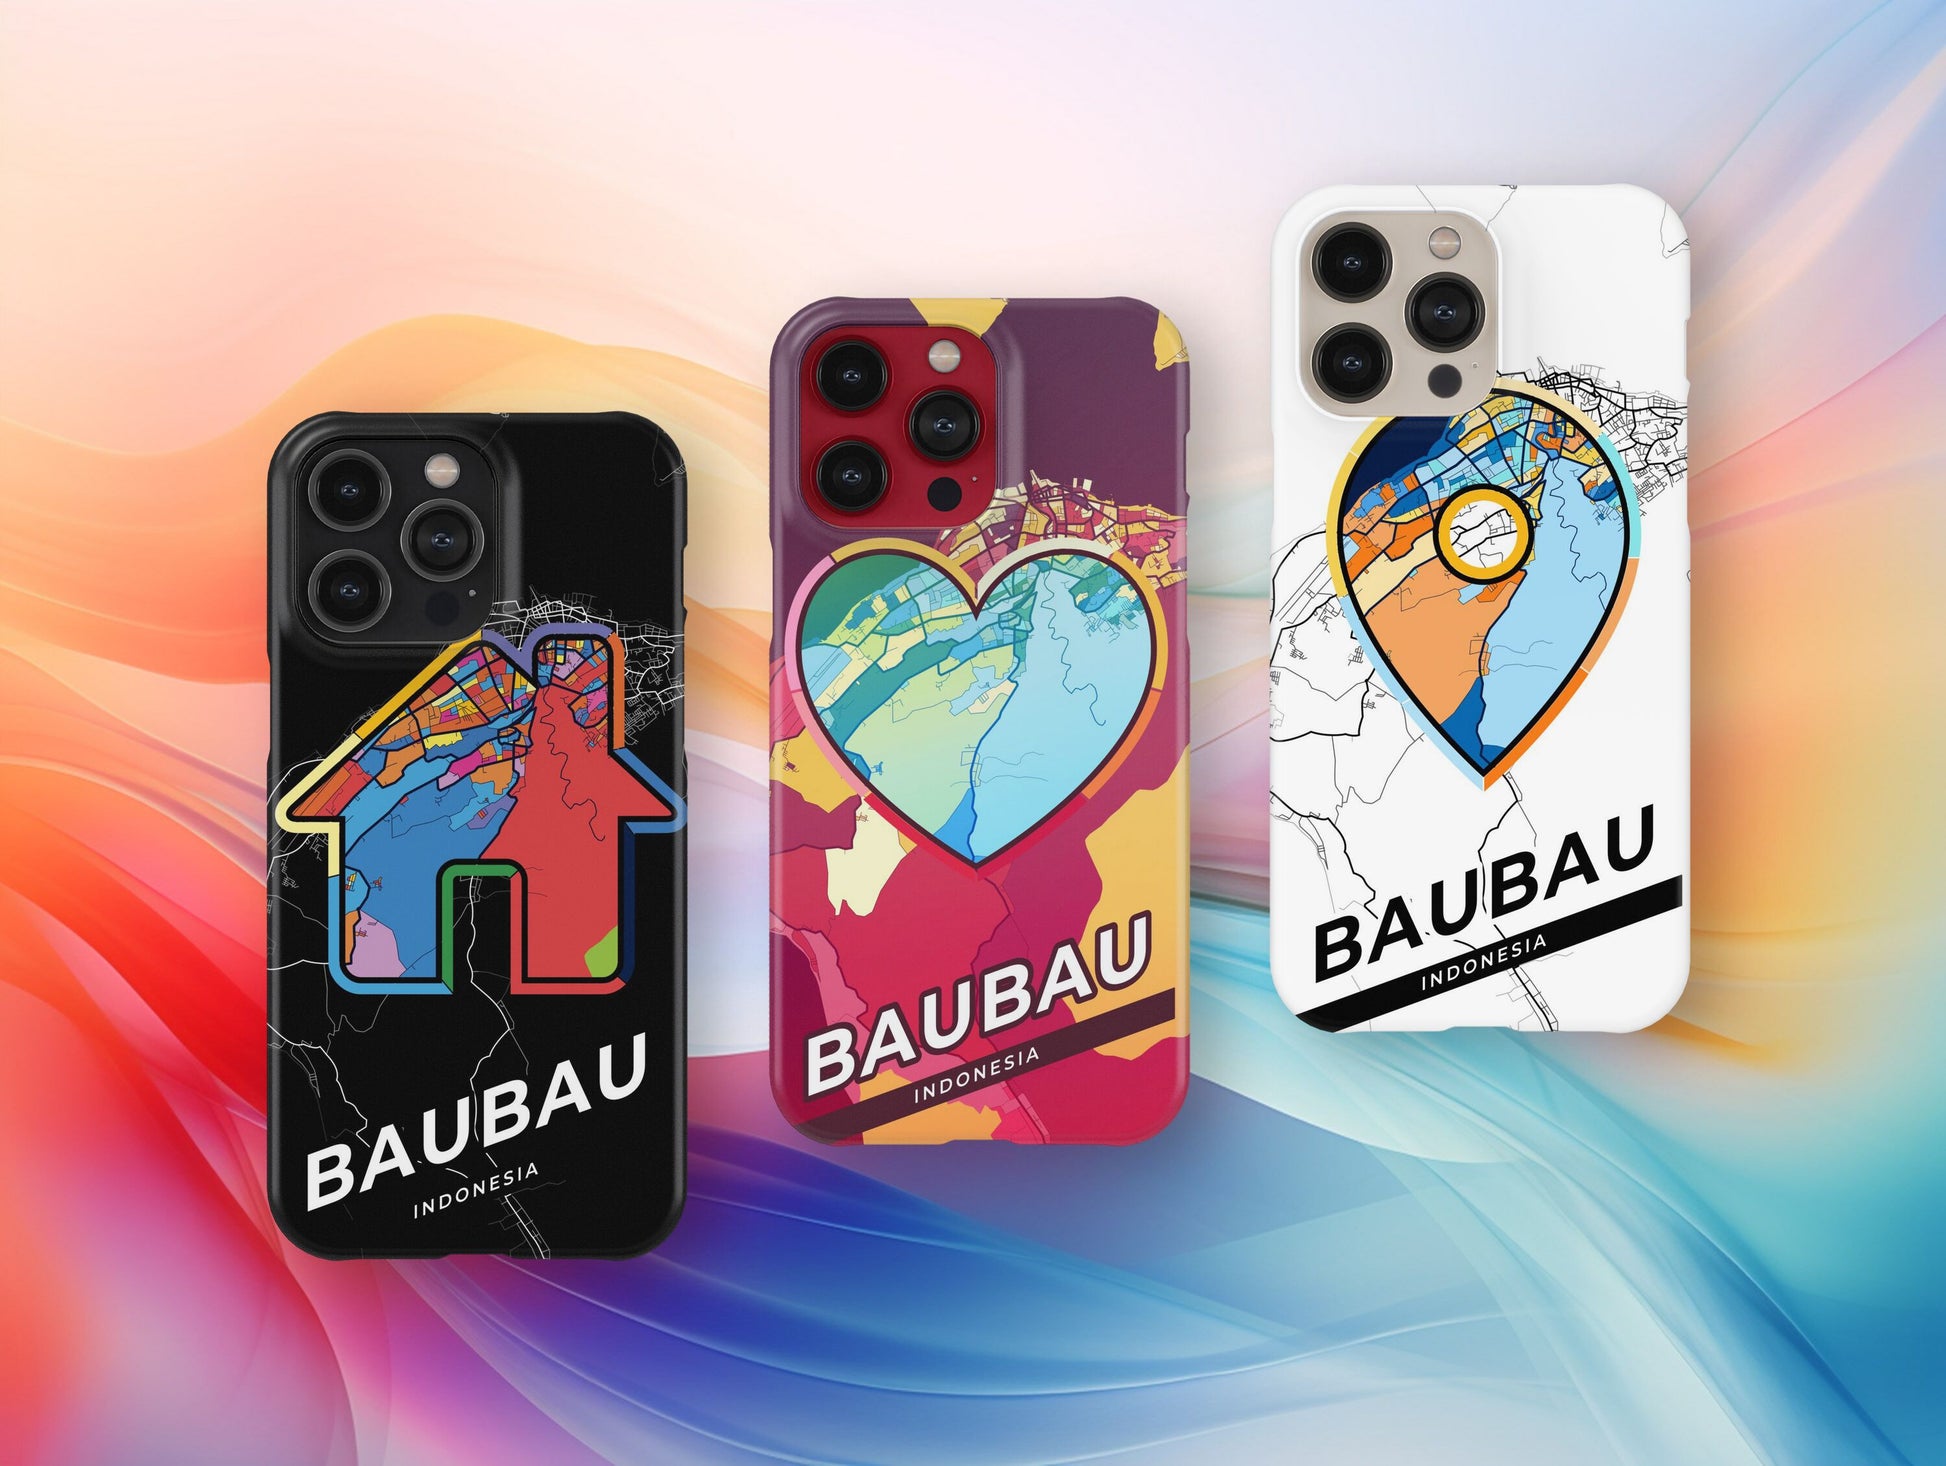 Baubau Indonesia slim phone case with colorful icon. Birthday, wedding or housewarming gift. Couple match cases.